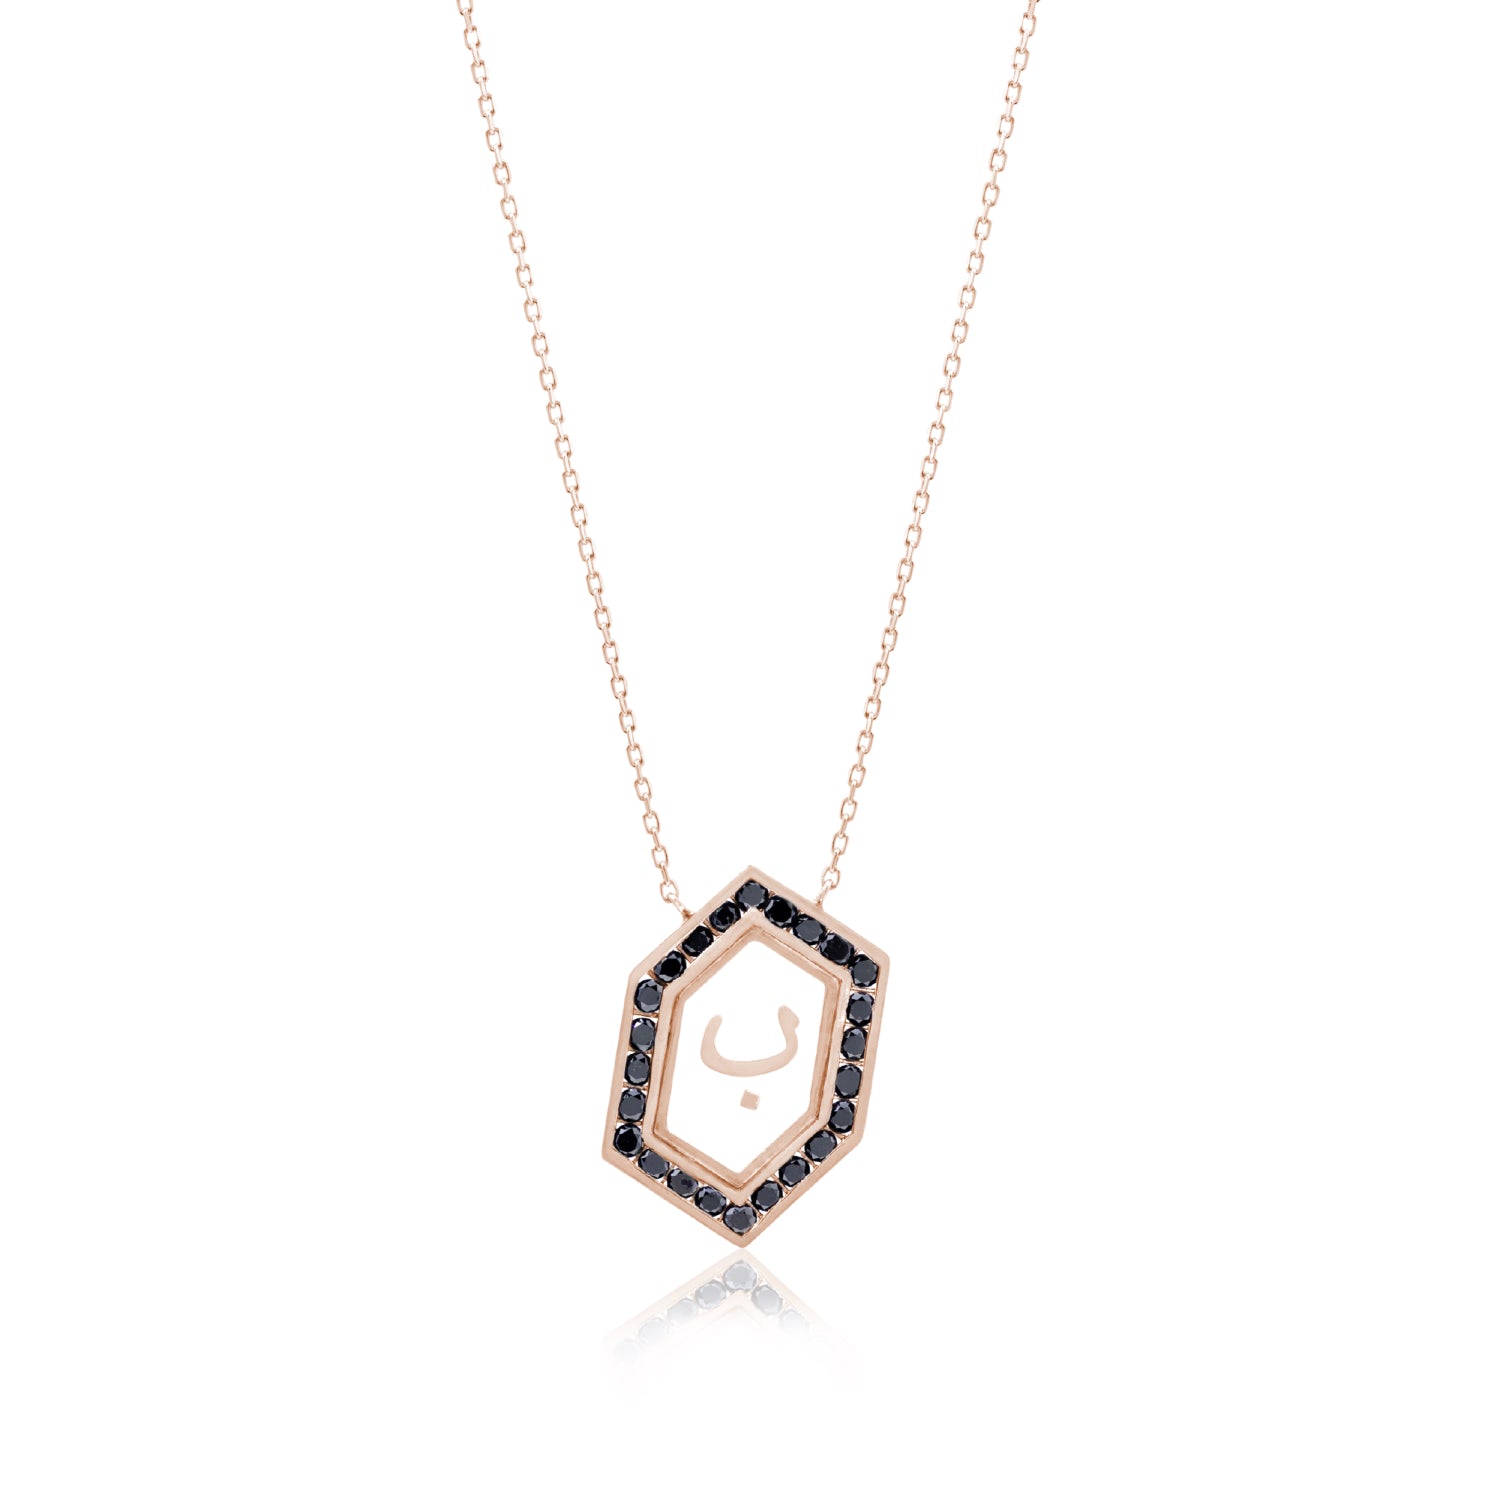 Qamoos 1.0 Letter ب Black Diamond Necklace in Rose Gold